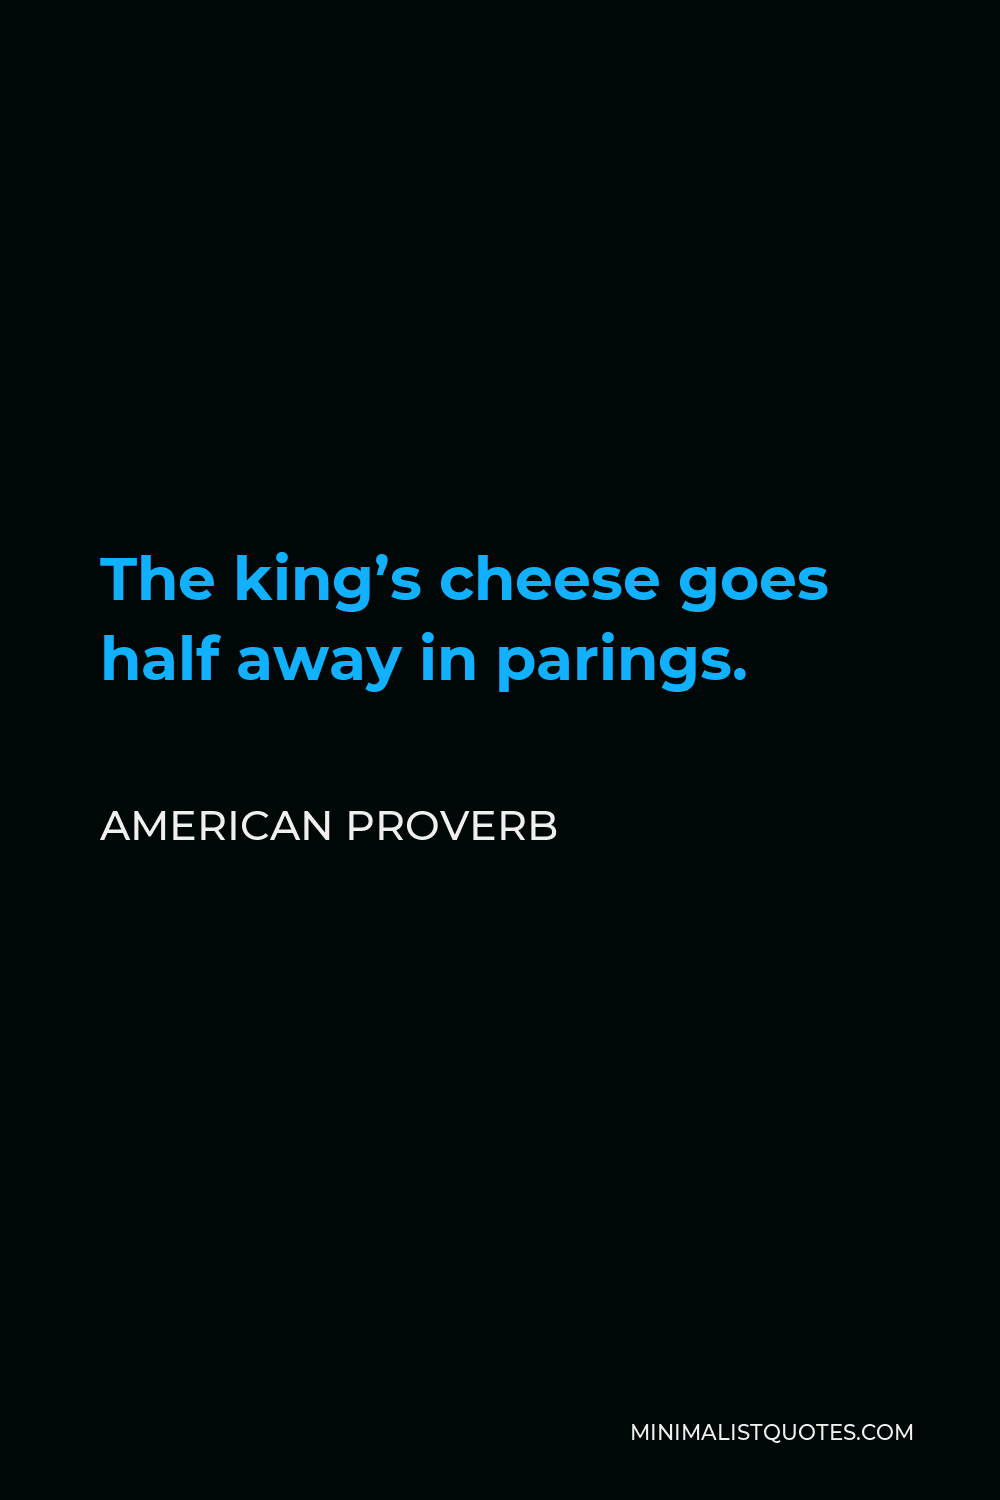 American Proverb Quote - The king’s cheese goes half away in parings.